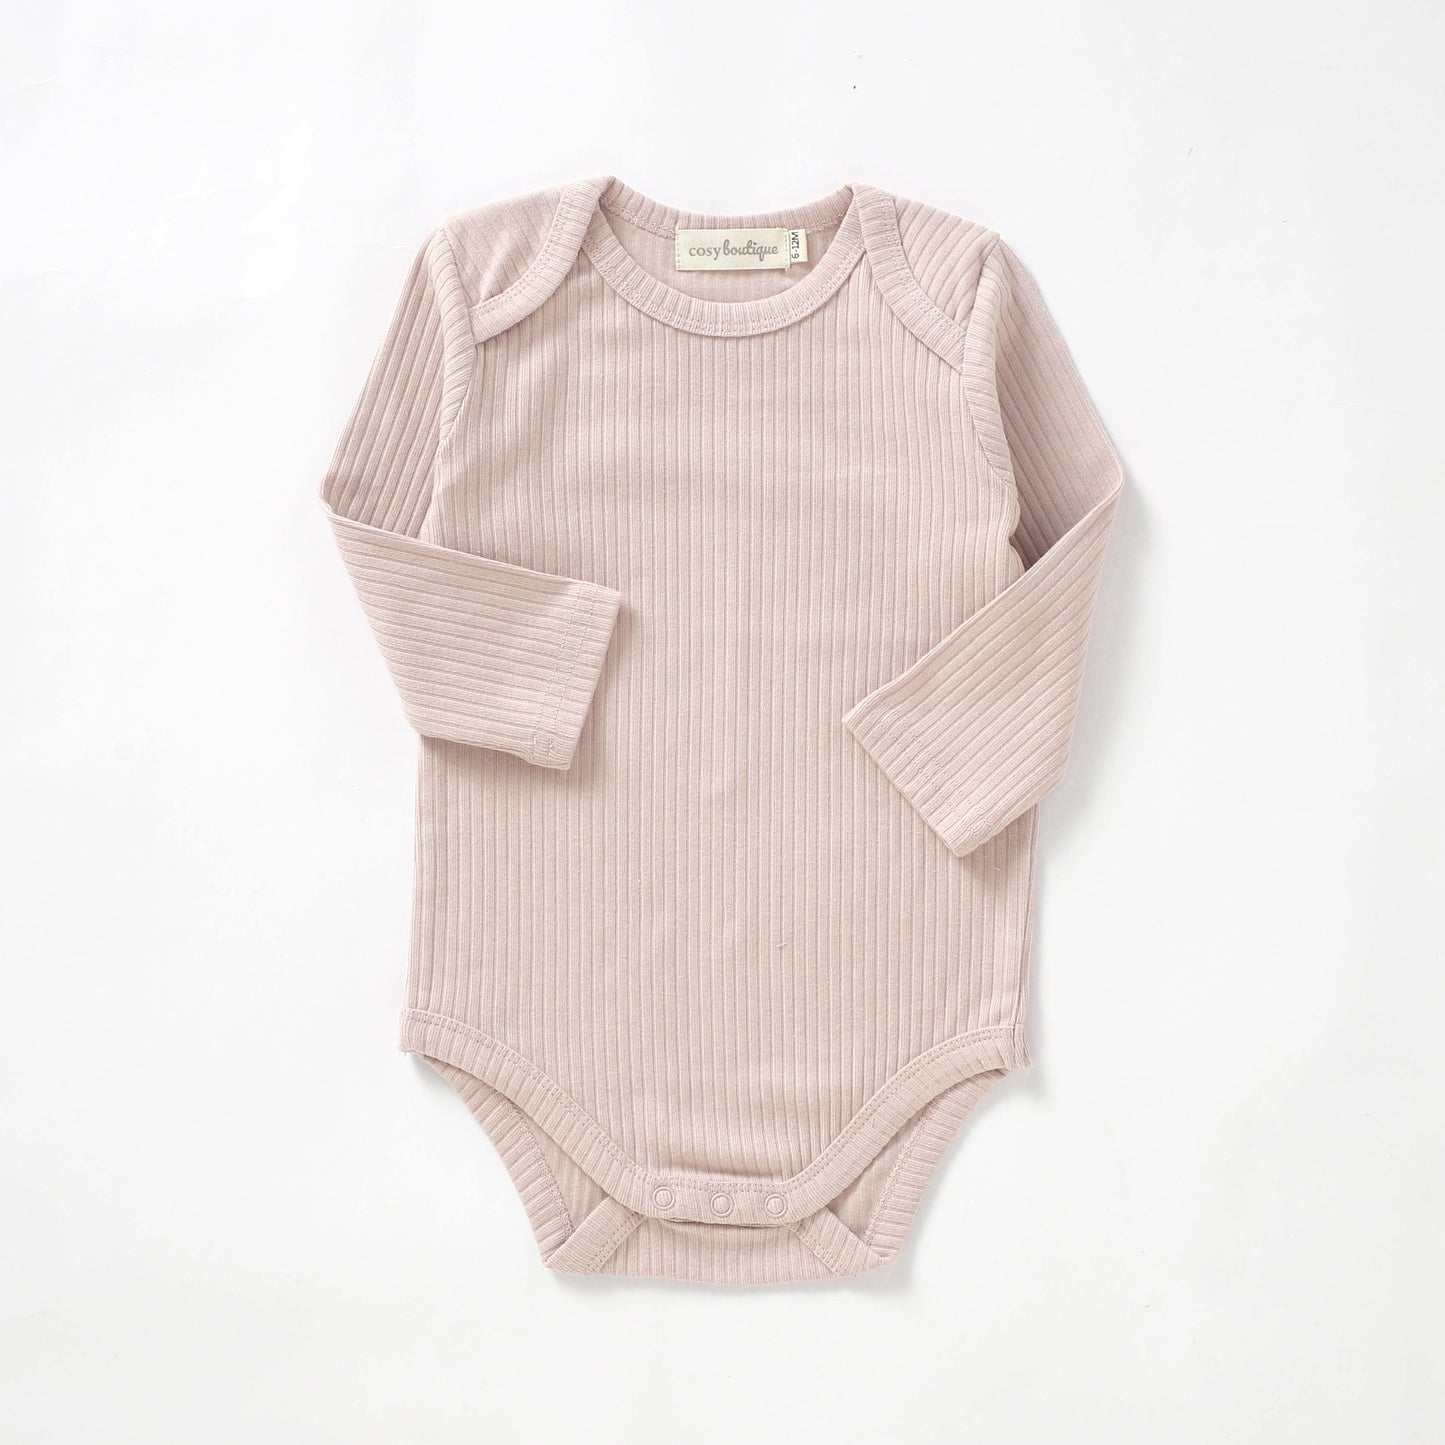 Organic Cotton Rib Long Sleeve Bodysuit 0-3 Months (000) / Blush | Baby Bodysuits | Boys & Girls Clothing For Babies & Toddlers | Cosy Boutique NZ